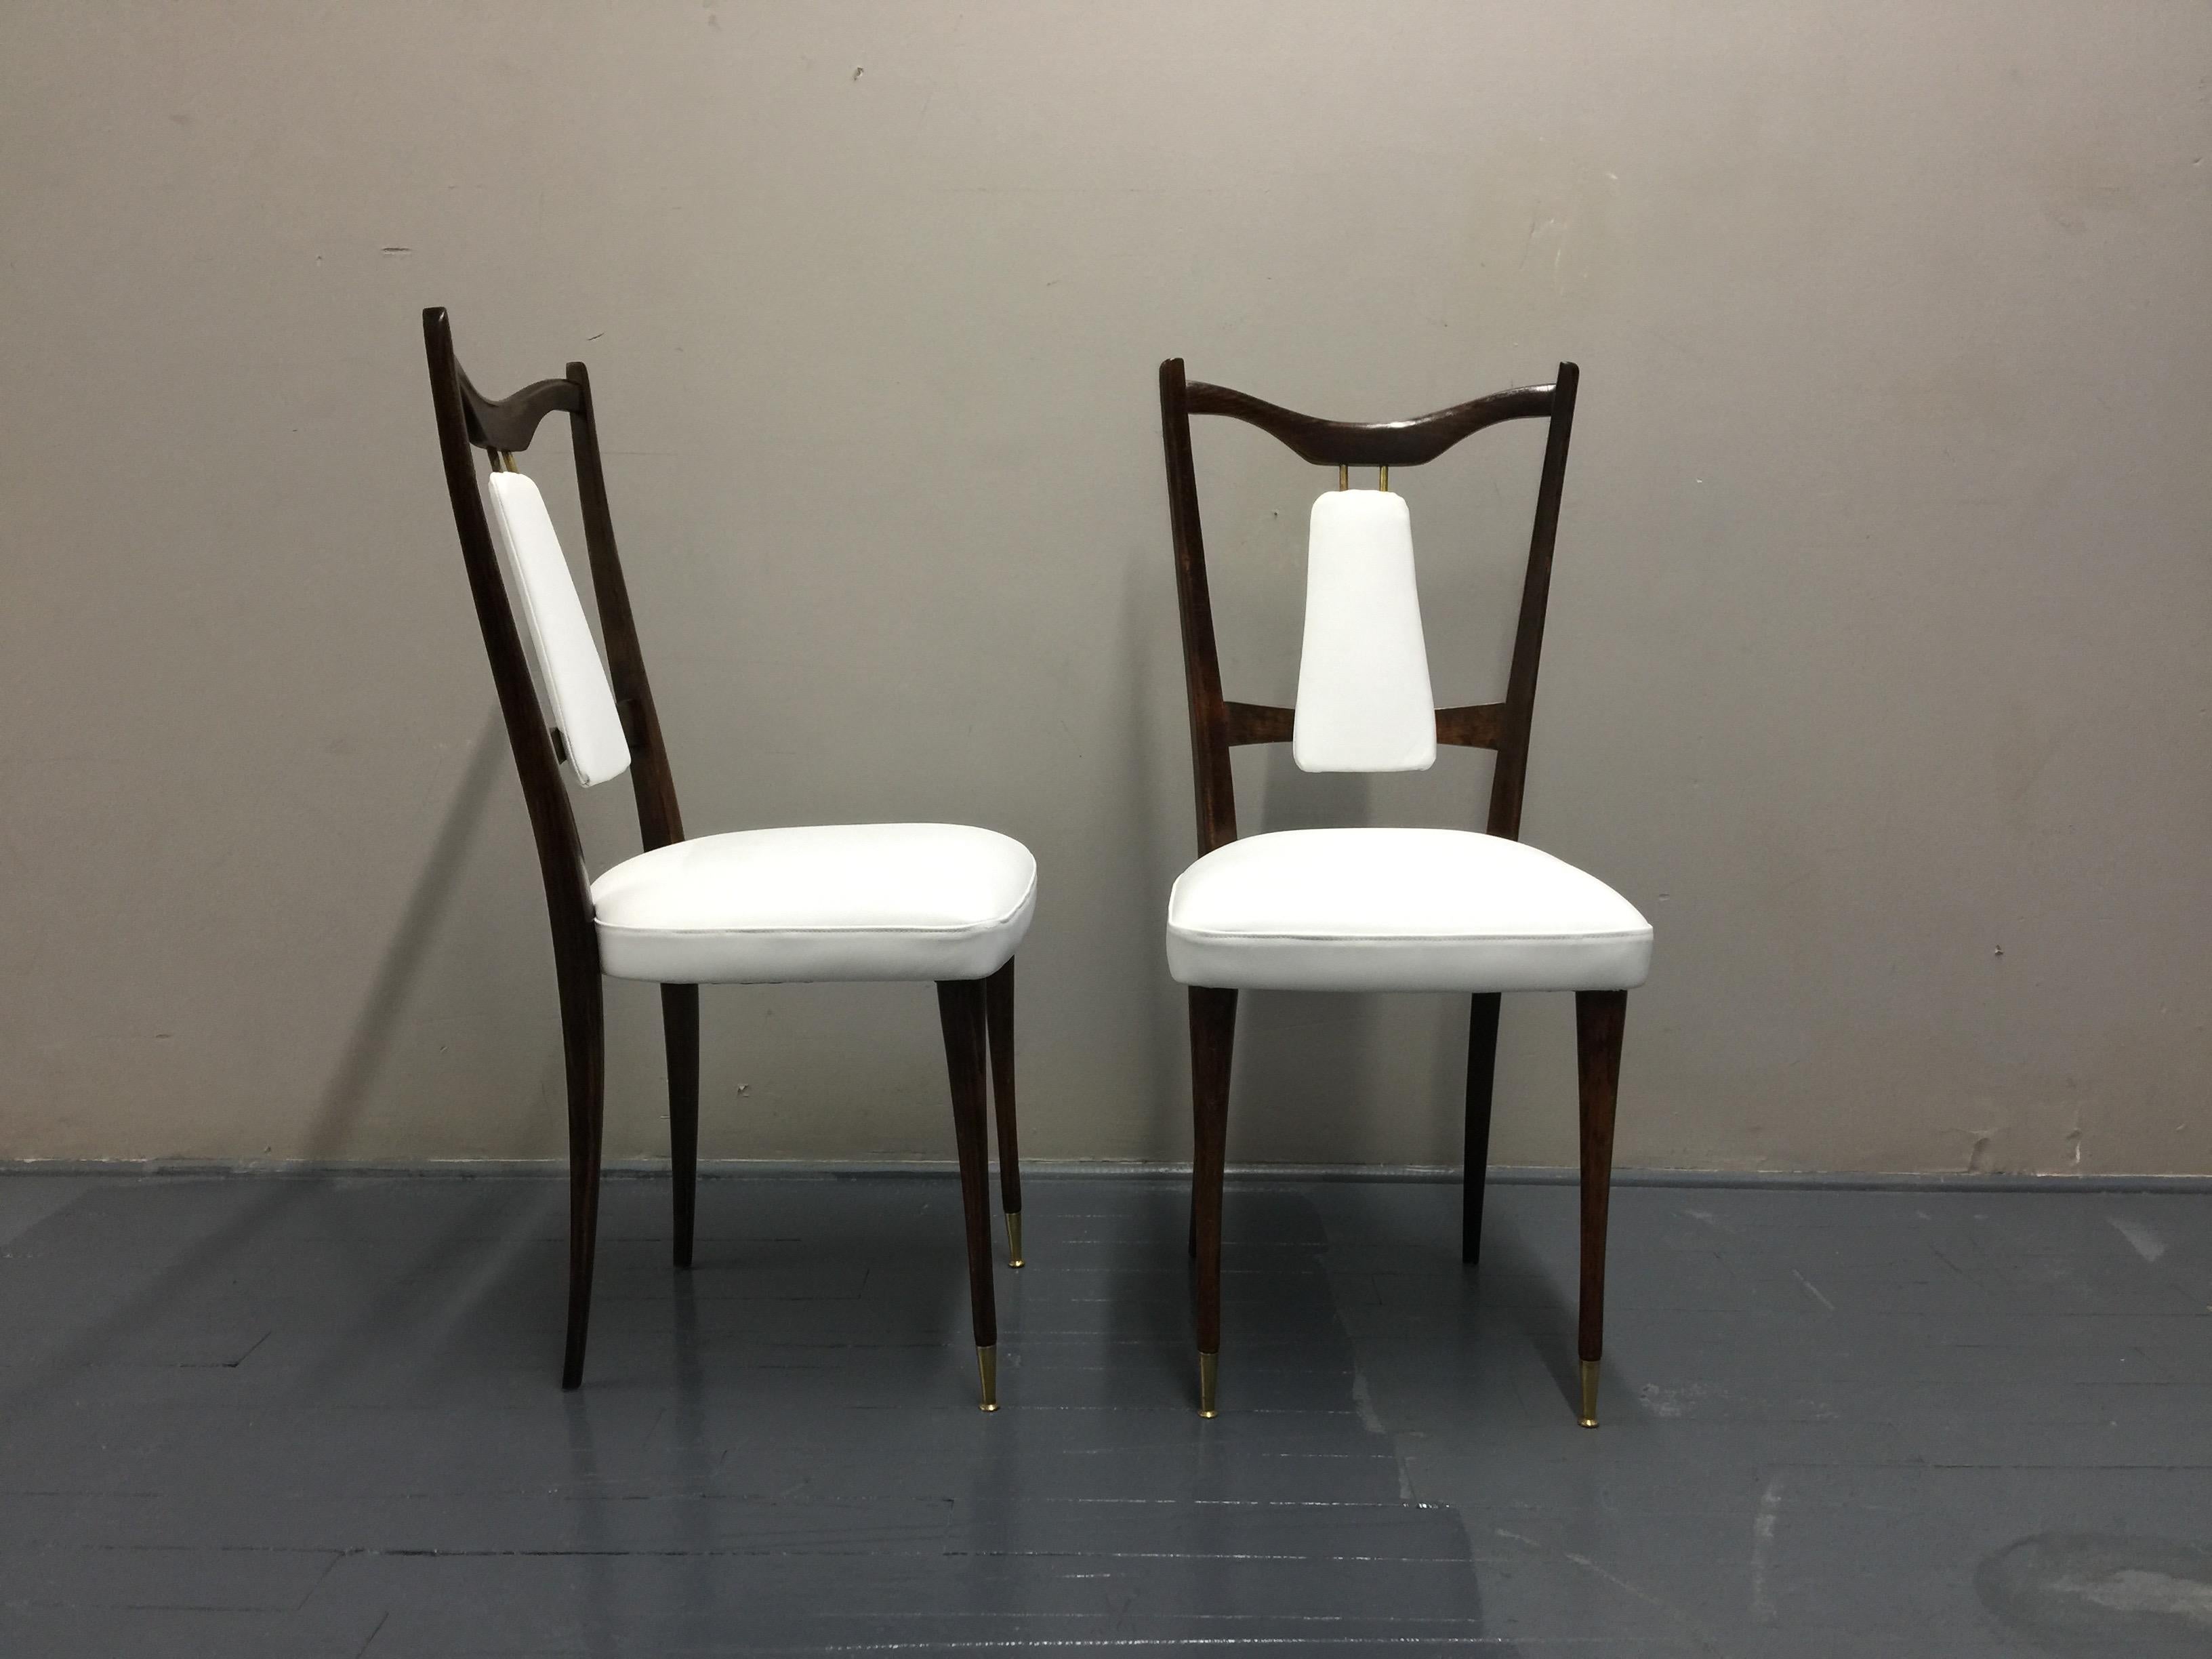 Set of 4 Italian midcentury dining room chairs, re-covered with new white leather, wood structure and wooden legs with brass feet, circa 1950s. Good vintage condition for the structure, brand new white leather cover and padding. This set is made of